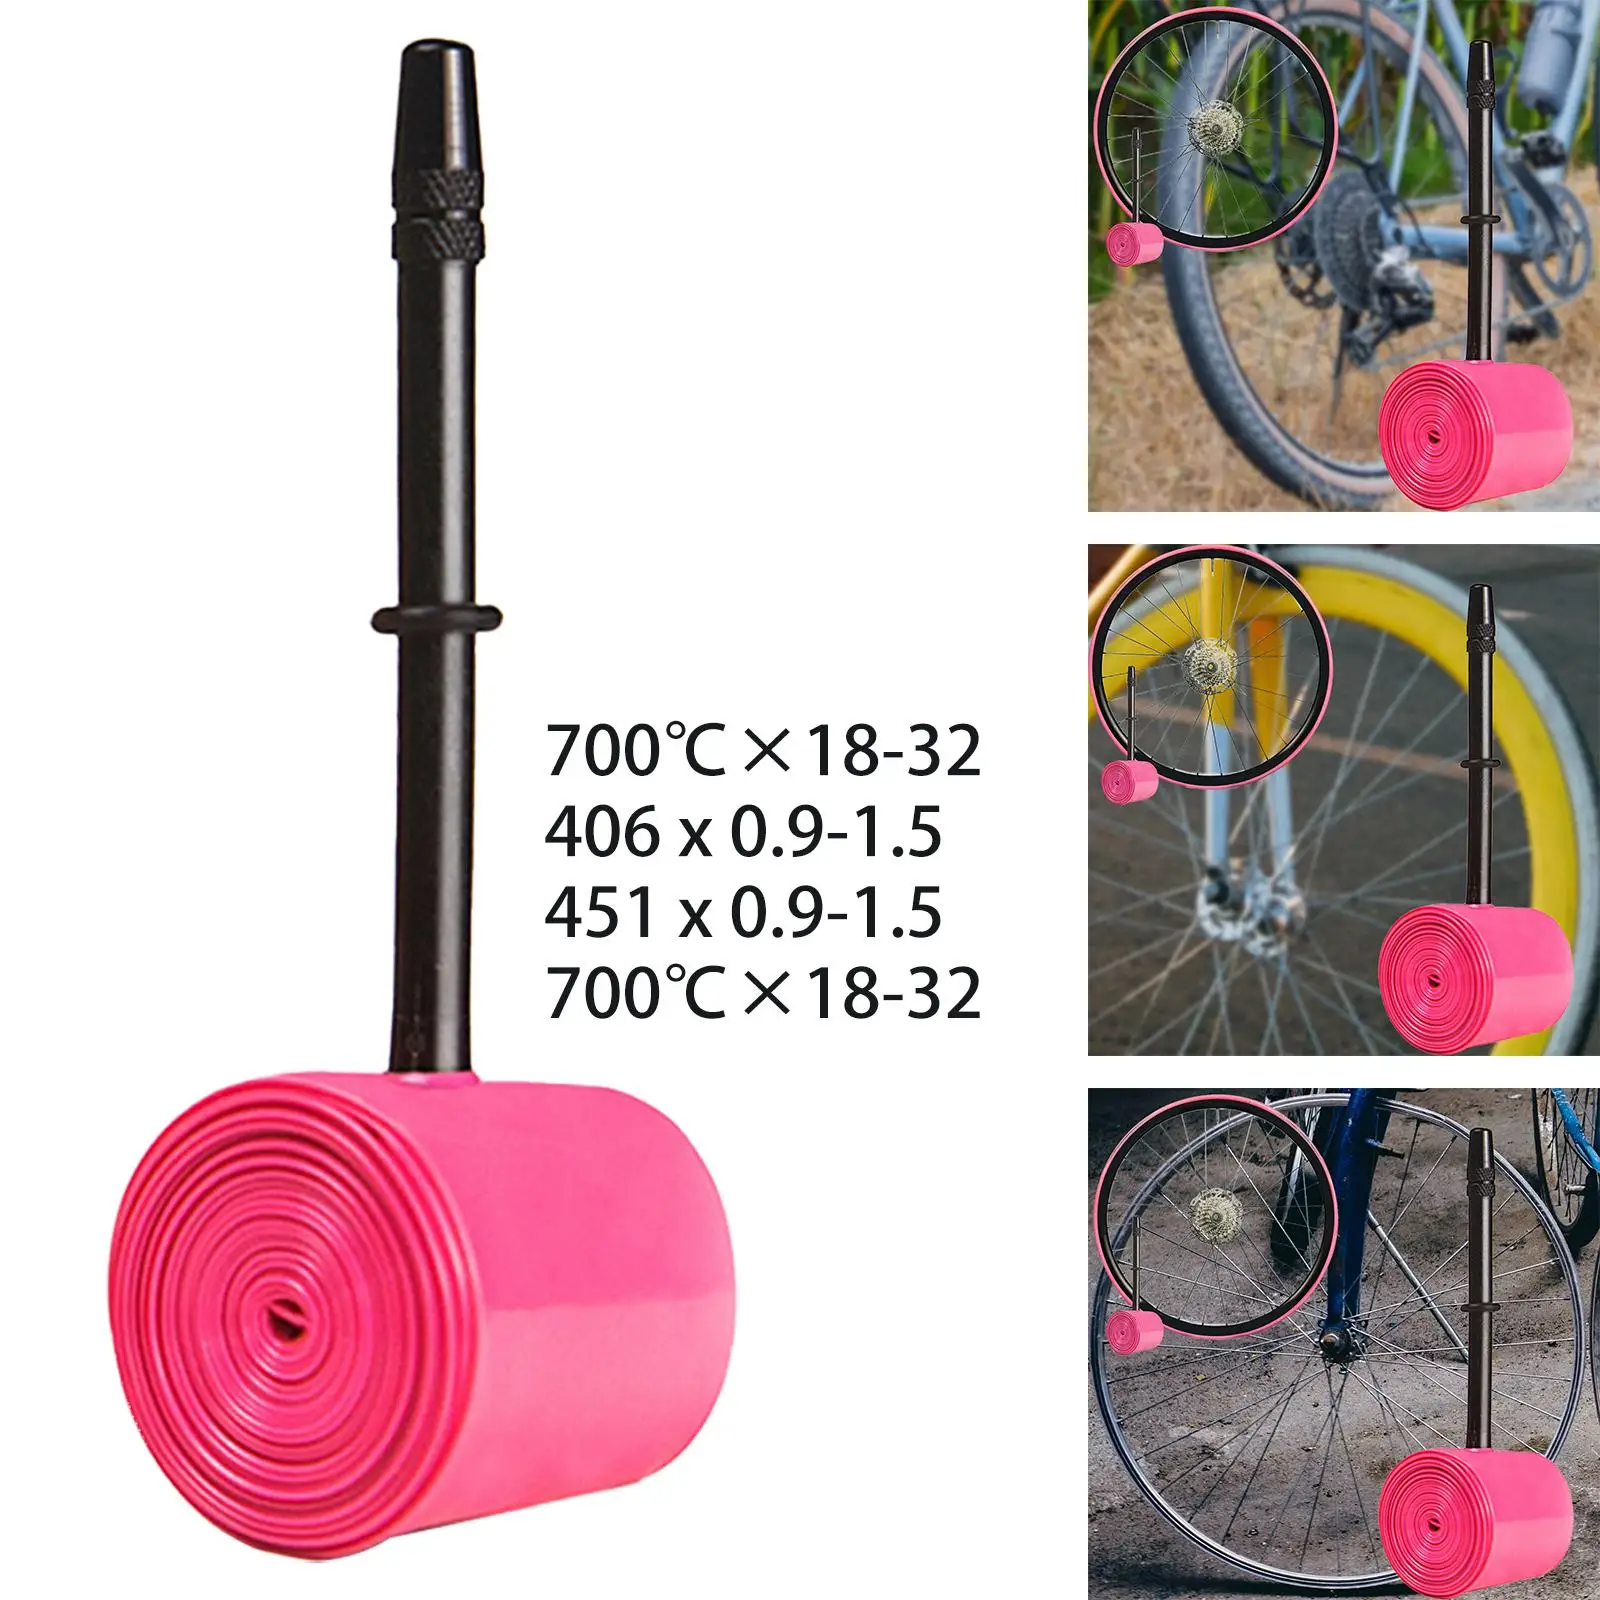 700 x 18 23 25 28 30 32C Bicycle Inner Tube Sv Valve 65mm Replacement Accessories Bike Tubes for Bicycle Liner Tire Accessories